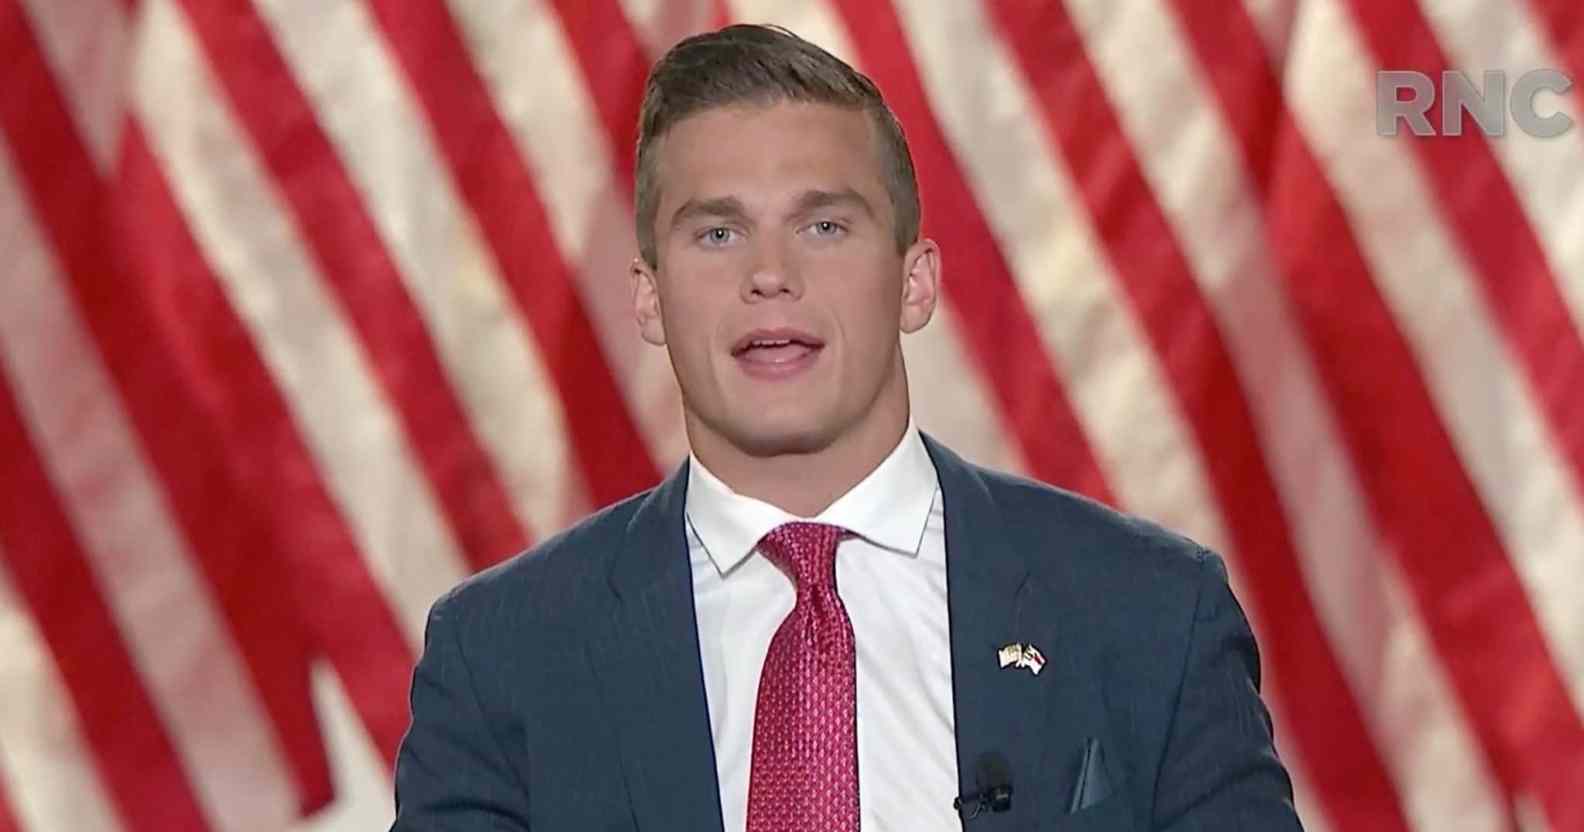 Madison Cawthorn addresses the virtual 2020 Republican National Convention, wearing a navy suit, white shirt and red tie against the stripes of the American flag